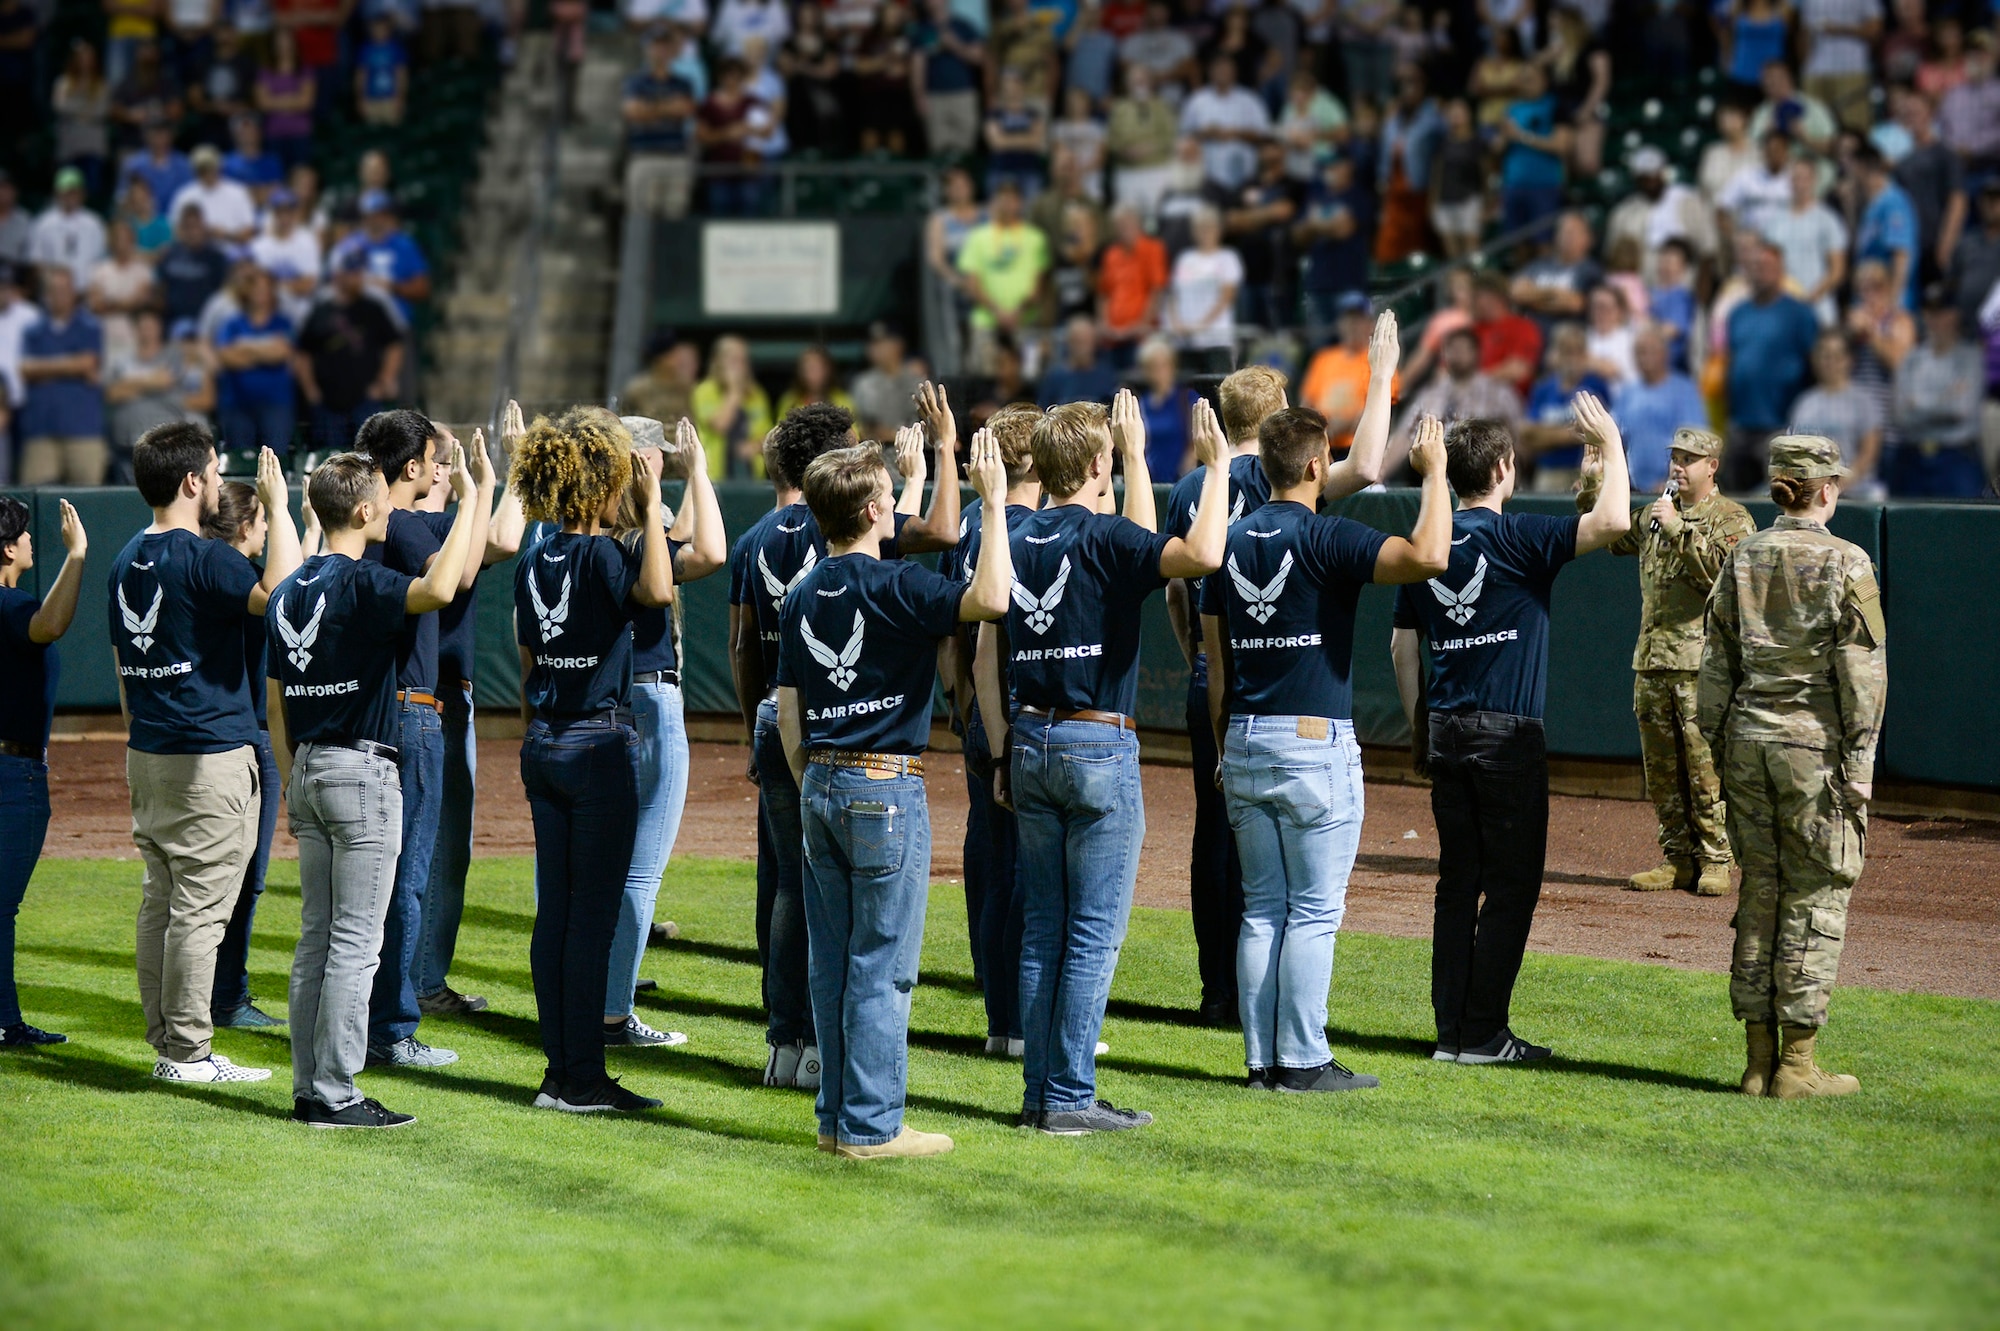 Lt. Col. Jason Haney, 368th Recruiting Squadron commander, gives the oath of enlistment to 22 Air Force recruits during the Aug. 9, 2019, Military Appreciation Night with the Ogden Raptors and Idaho Falls Chuckars at Lindquist Field in Ogden, Utah. Each year, the Raptors and Top of Utah Military Affairs Committee offer tickets to Hill Air Force Base personnel and their families. (U.S. Air Force photo by David Perry)